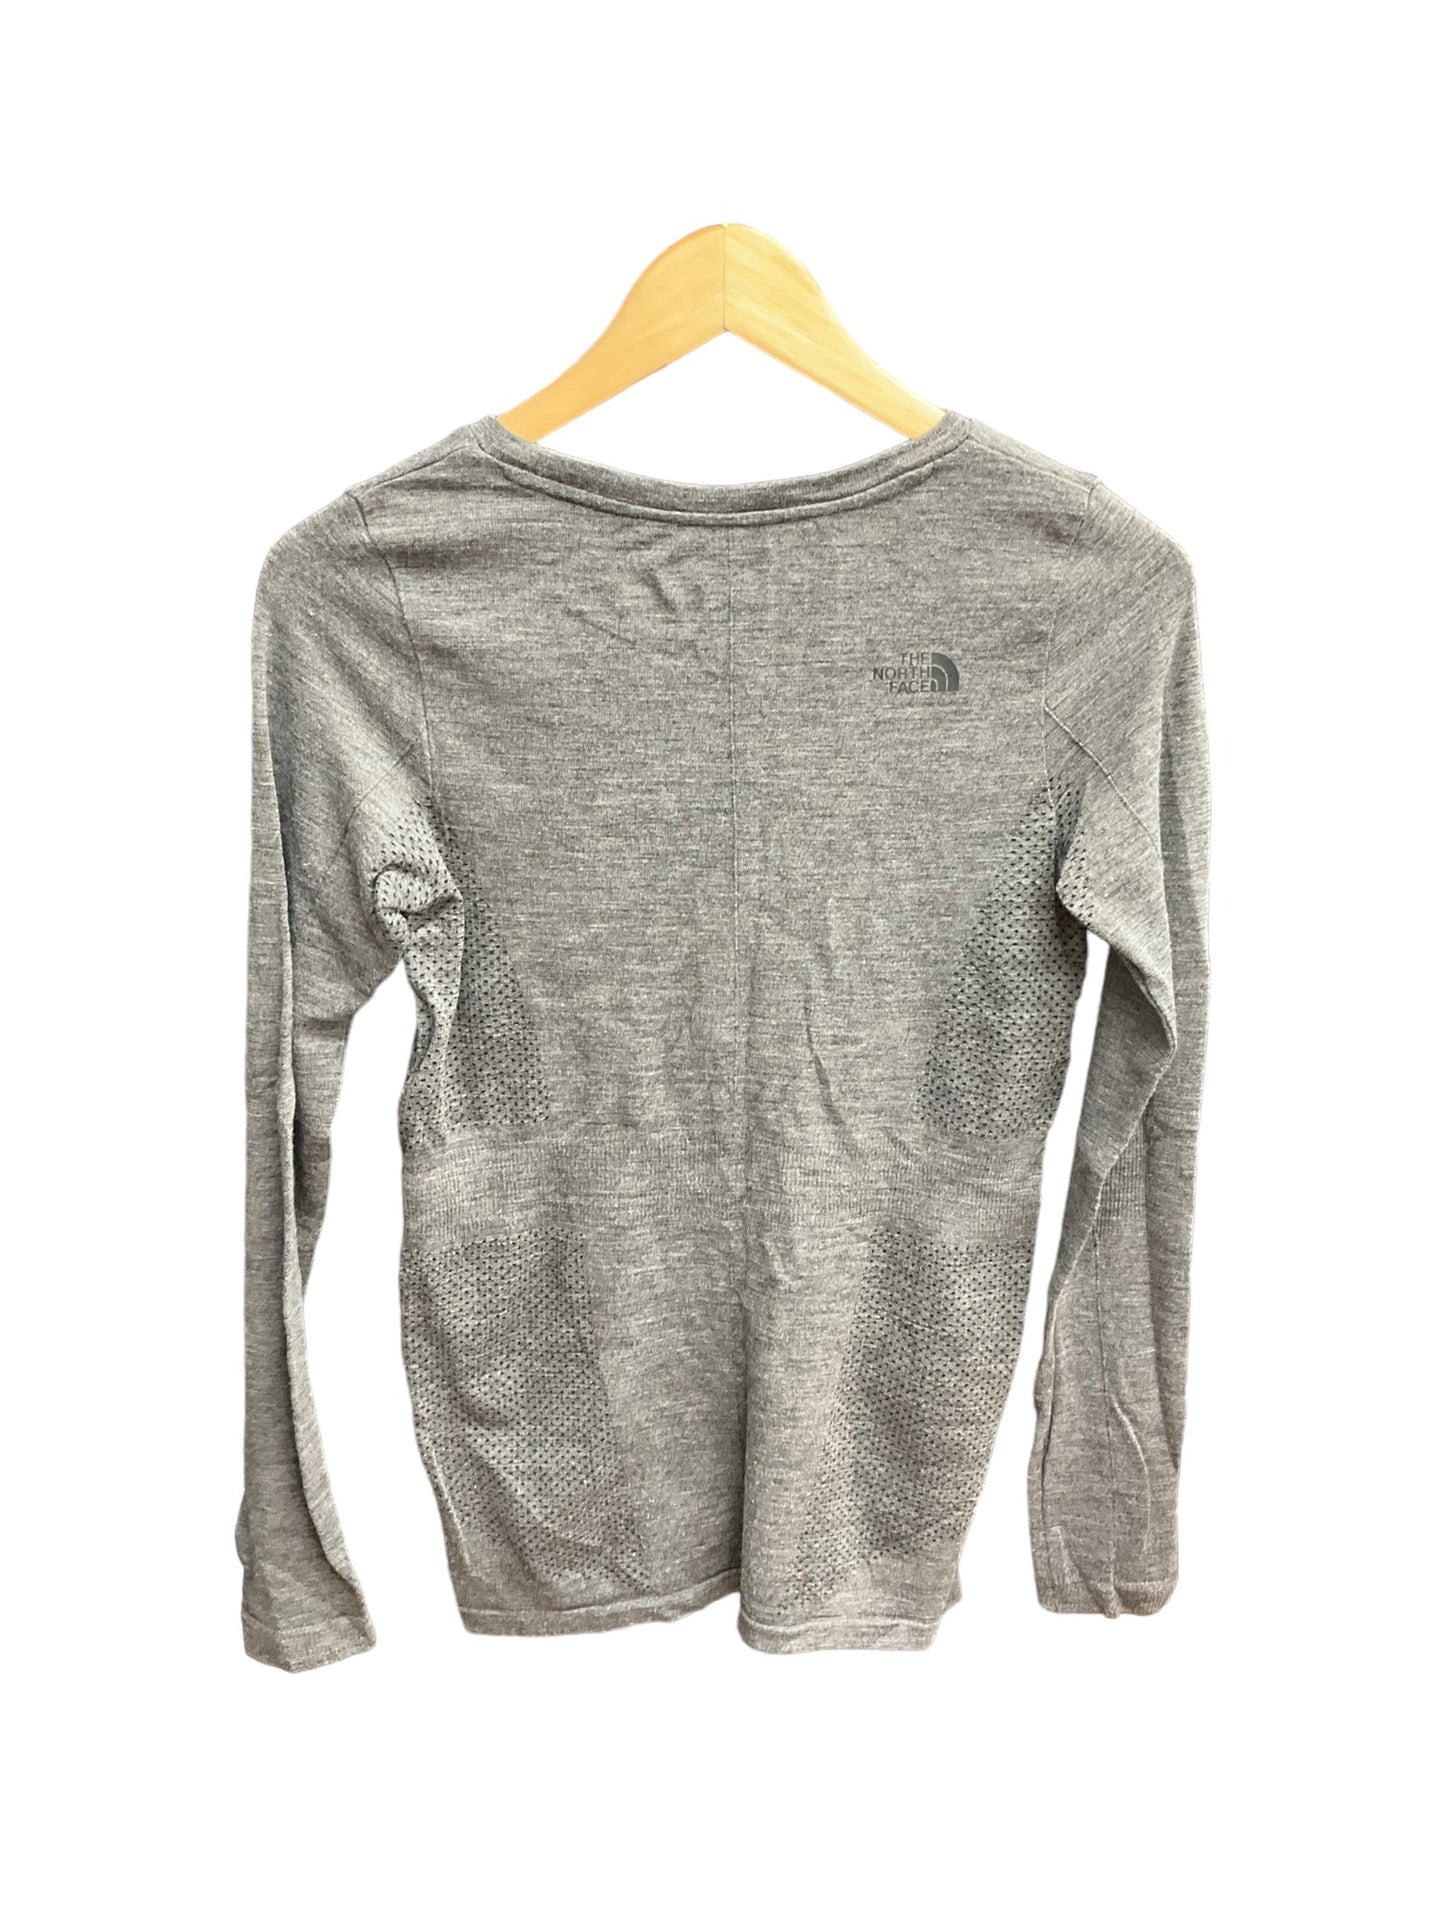 Grey Athletic Top Long Sleeve Crewneck The North Face, Size M